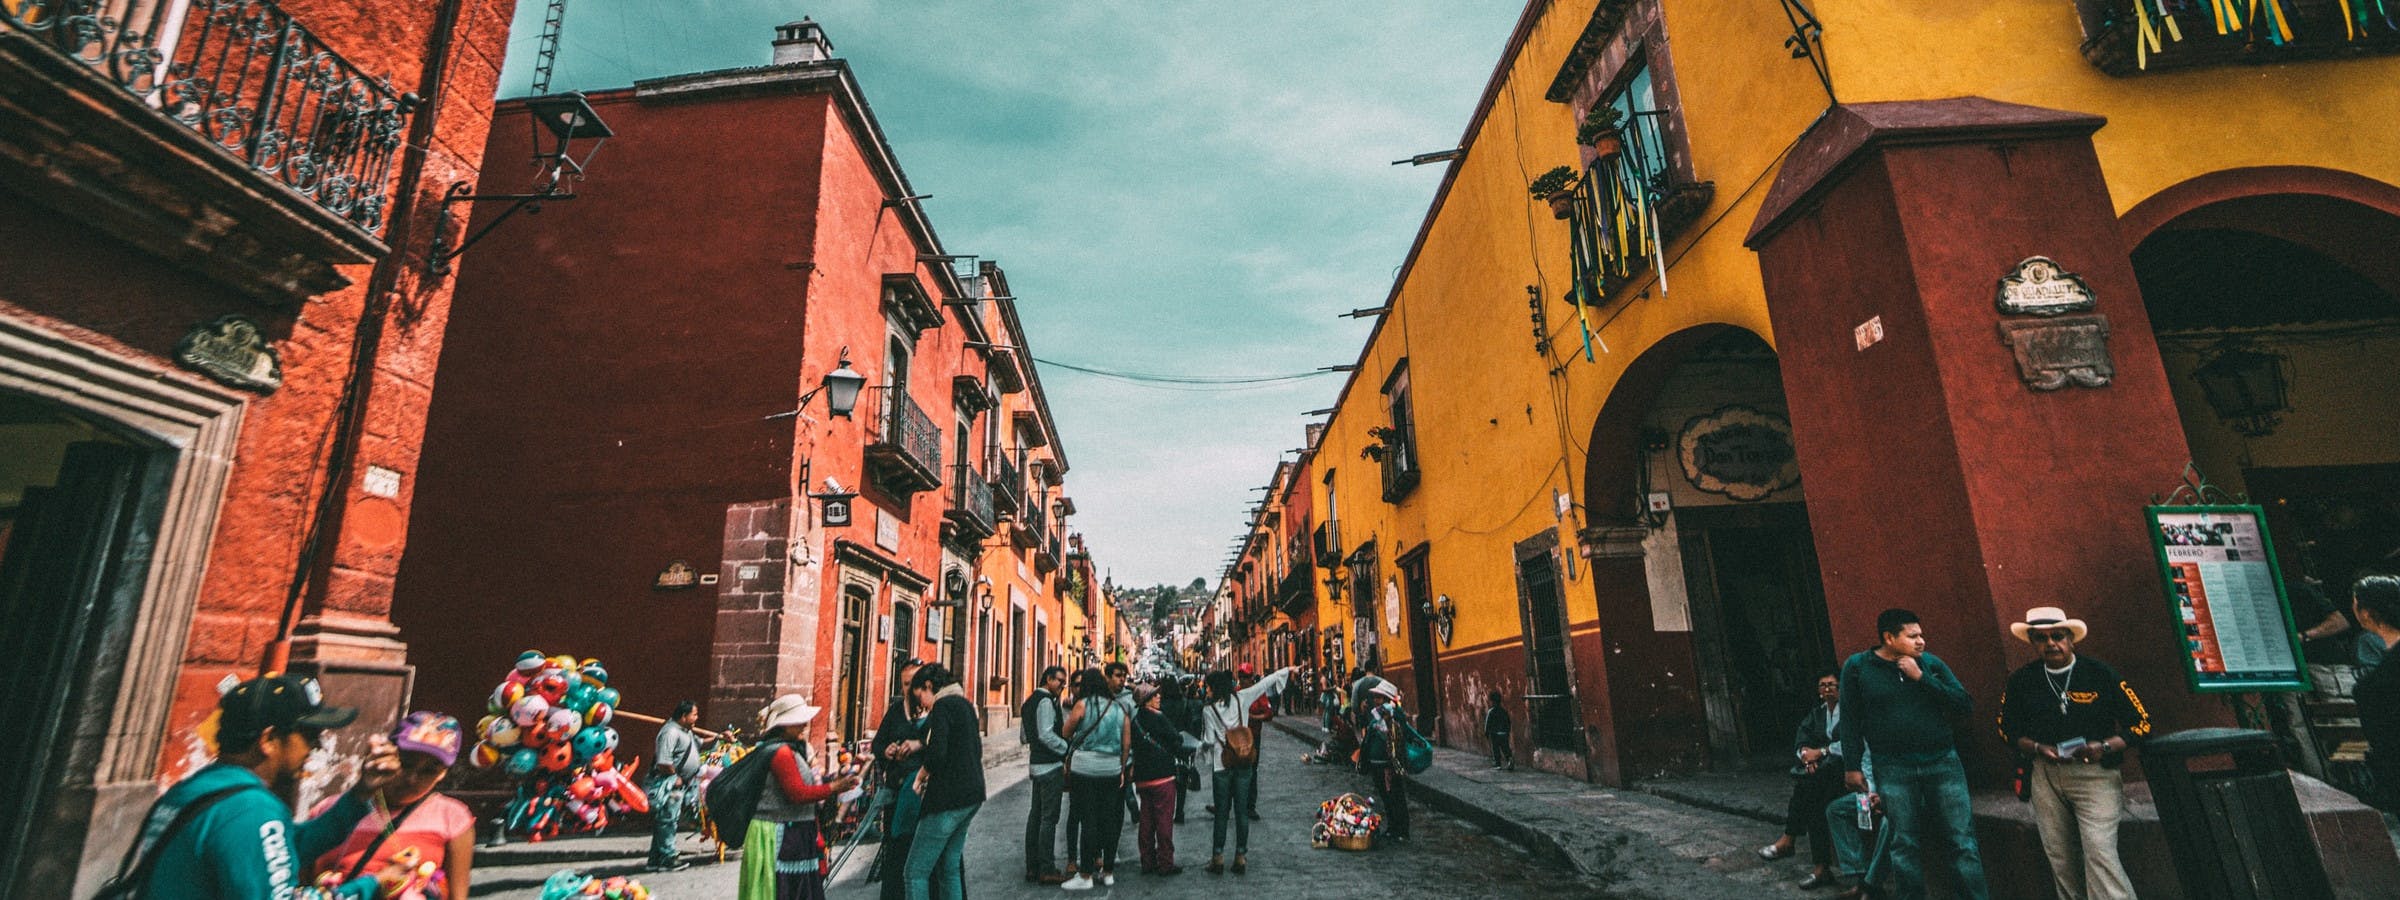 How to move to Mexico: Step-by-step guide - Wise